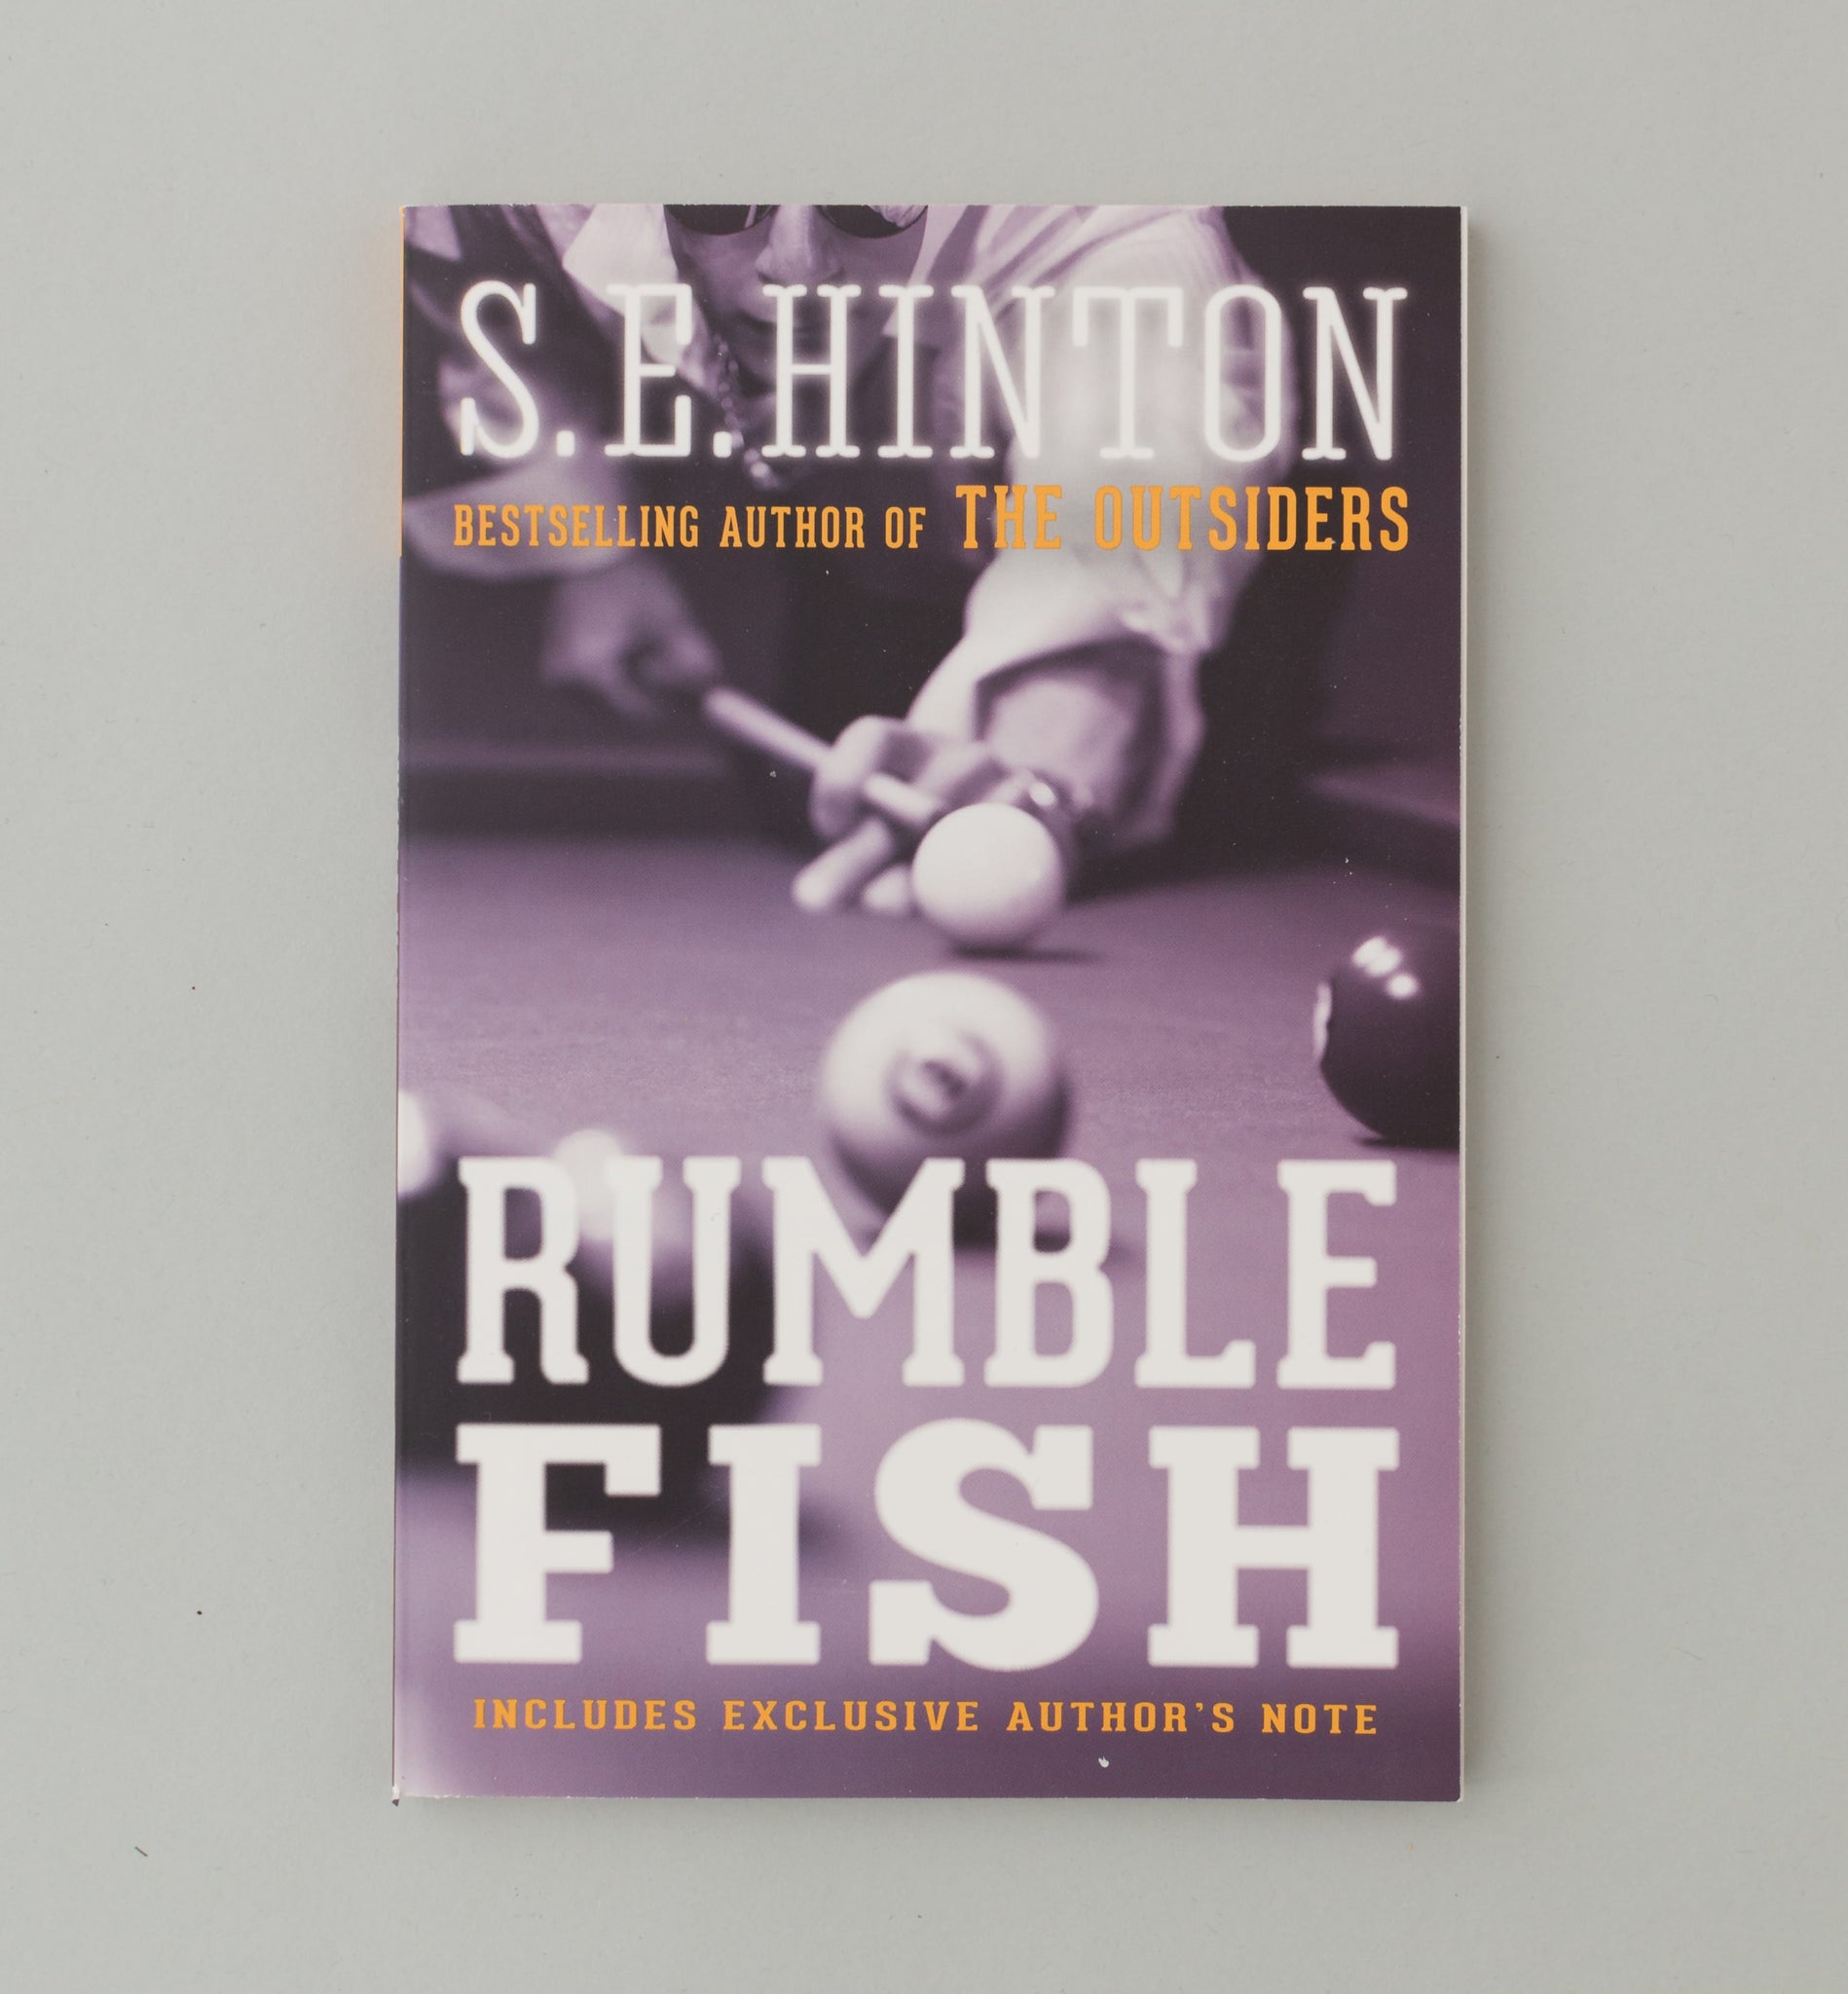 Rumble Fish by S.E Hinton